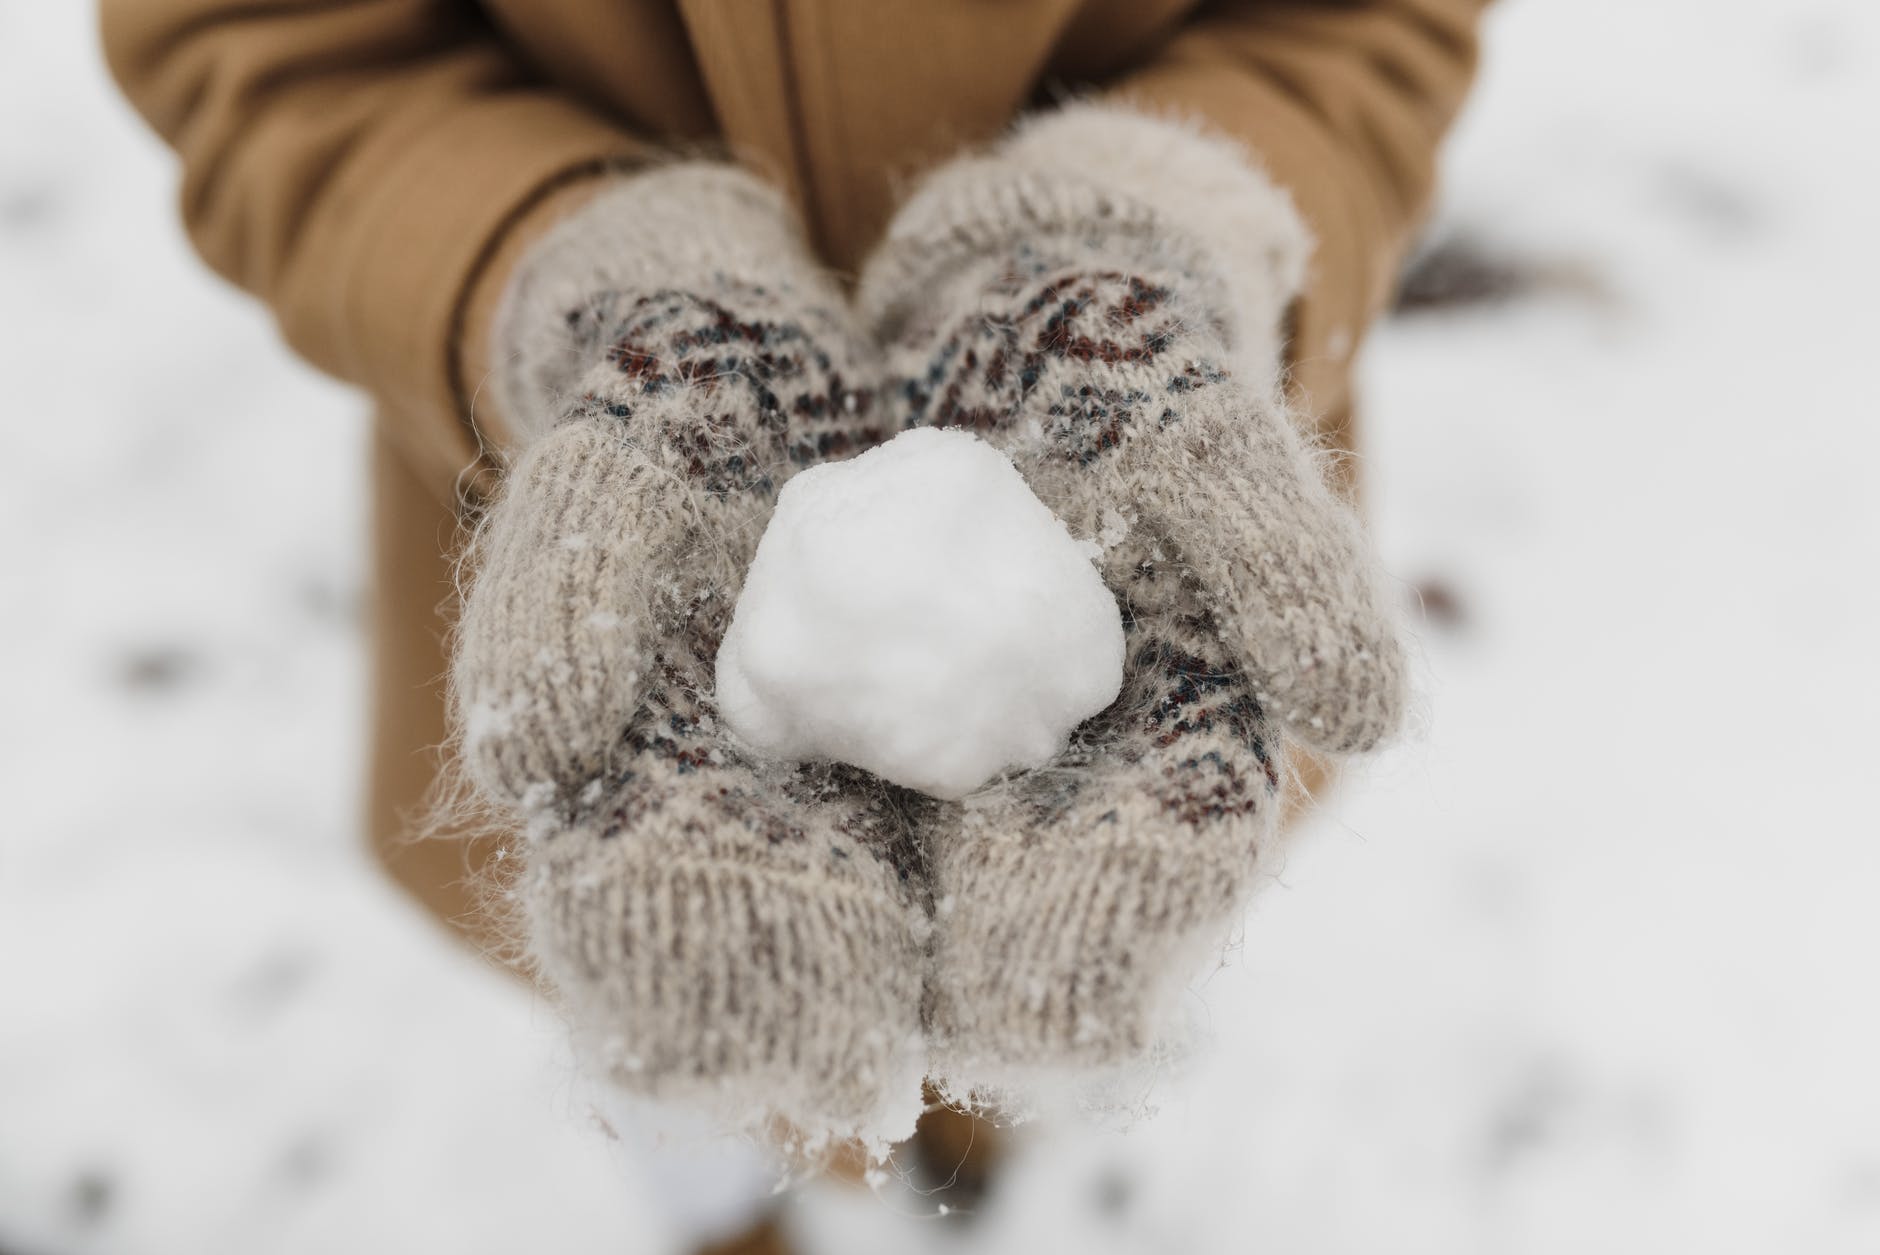 person wearing knitted gloves holding a snow